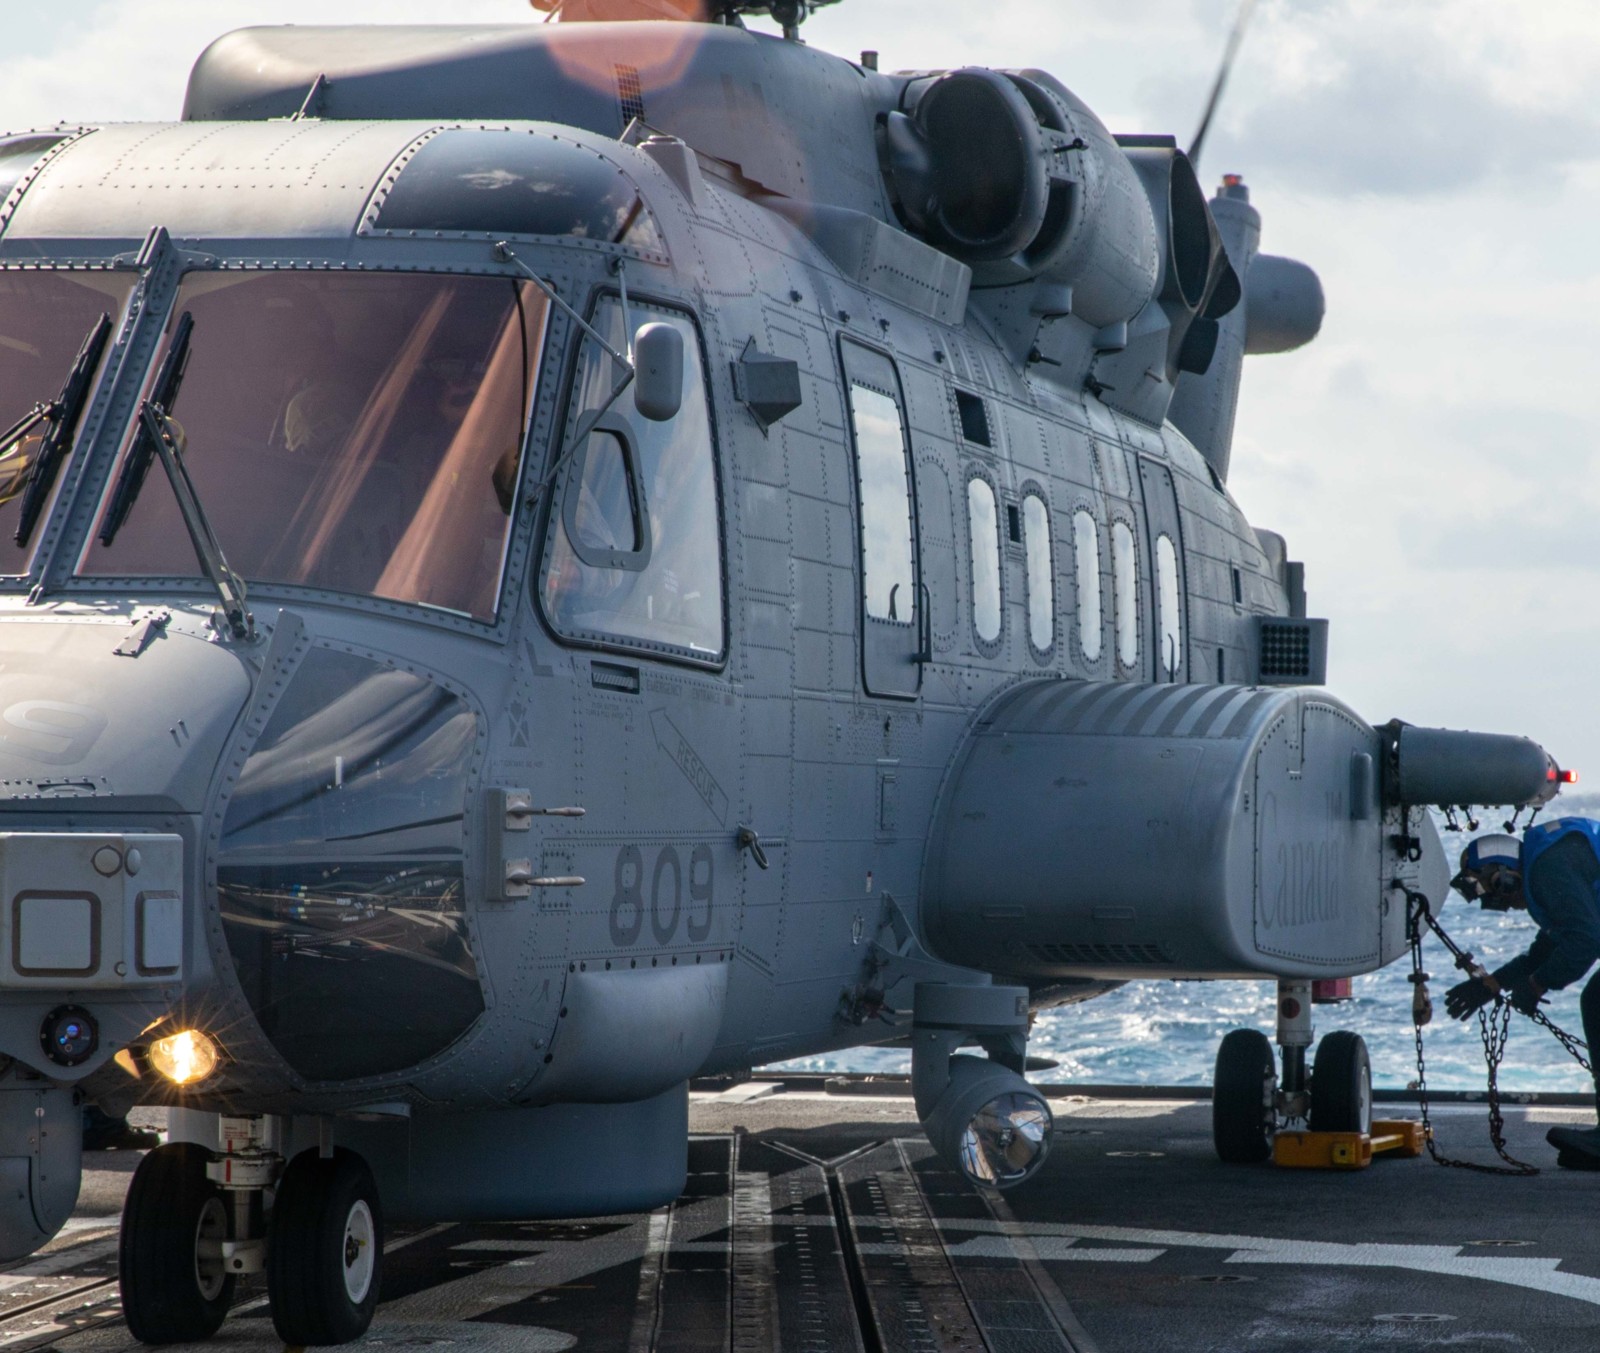 ch-148 cyclone naval helicopter royal canadian air force navy rcaf sikorsky hmcs 406 423 443 maritime squadron 12